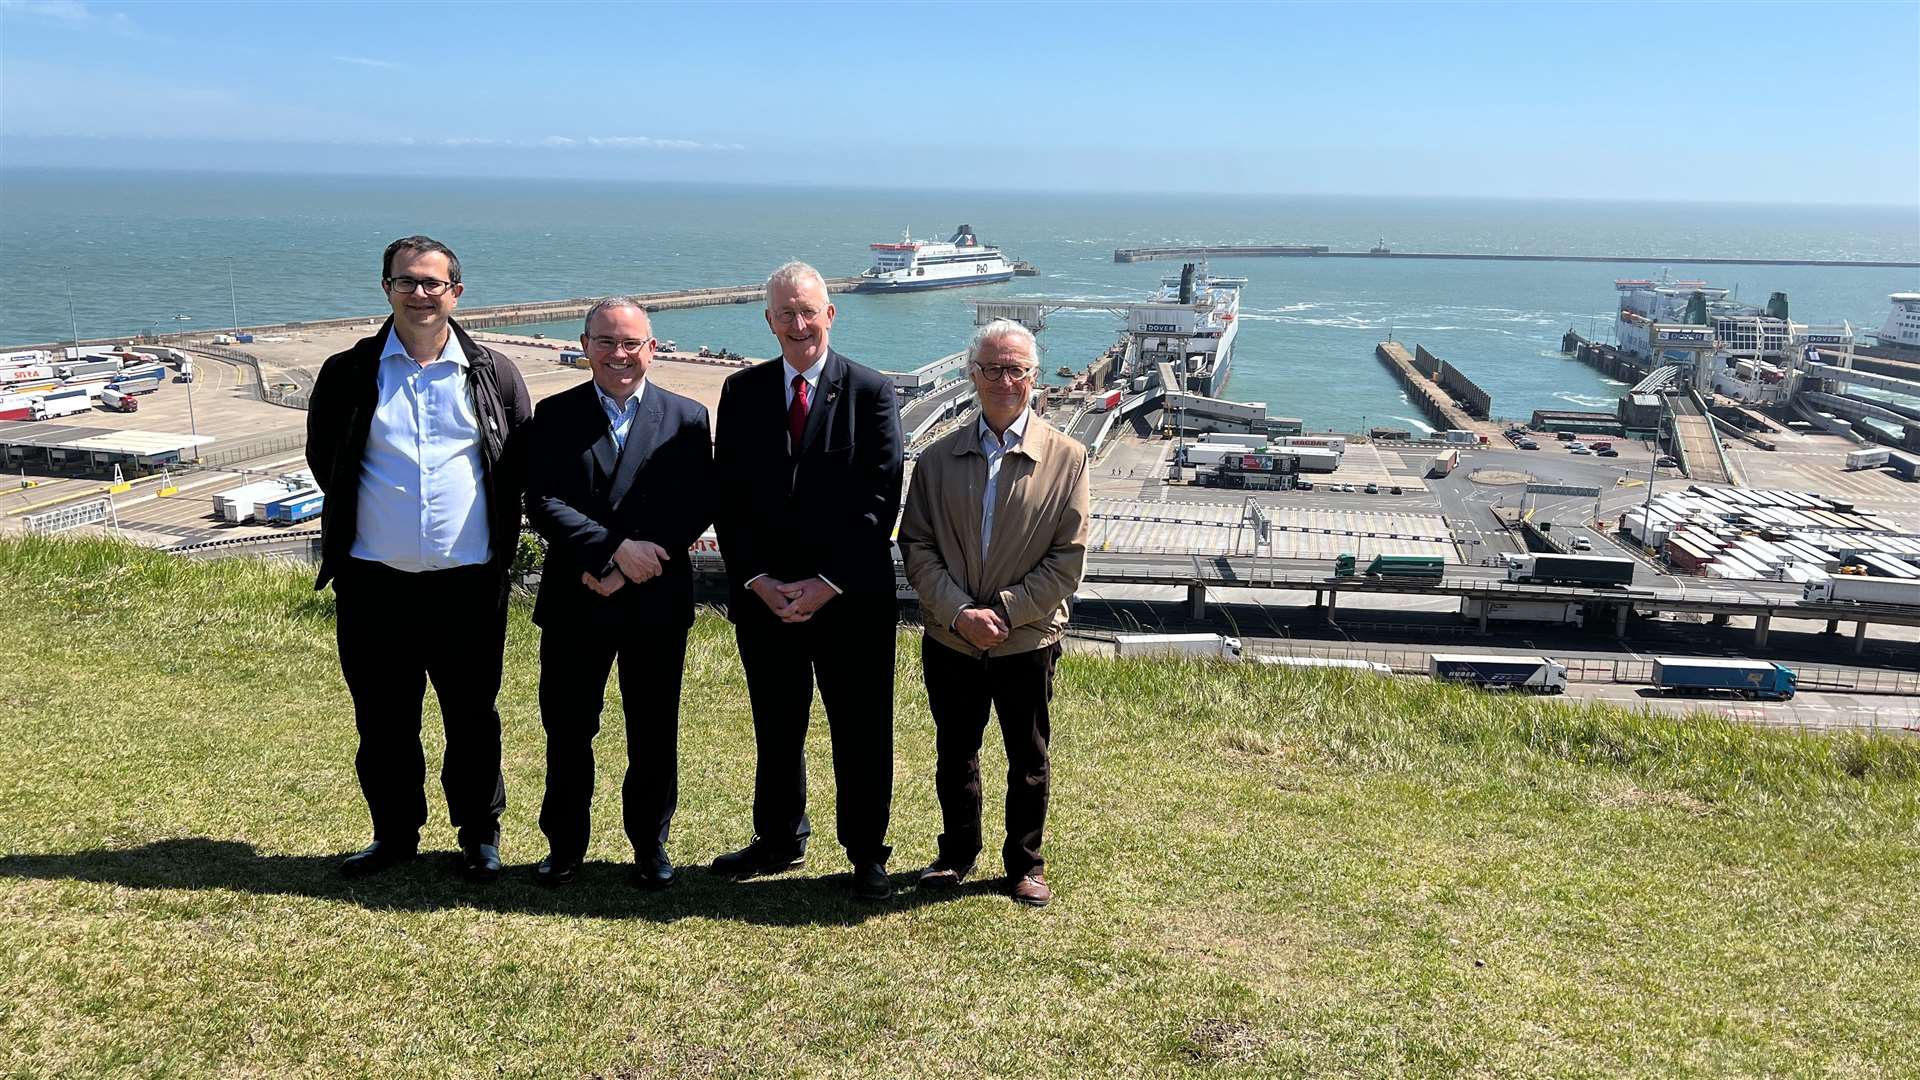 After visiting Maidstone, the trade commissioners went on to look at Dover Docks: from left, David Henig, trade advisor to the commission; Tim Reardon head of EU Exit, Port of Dover; Hilary Benn MP and Peter Norris, chairman of the Virgin Group